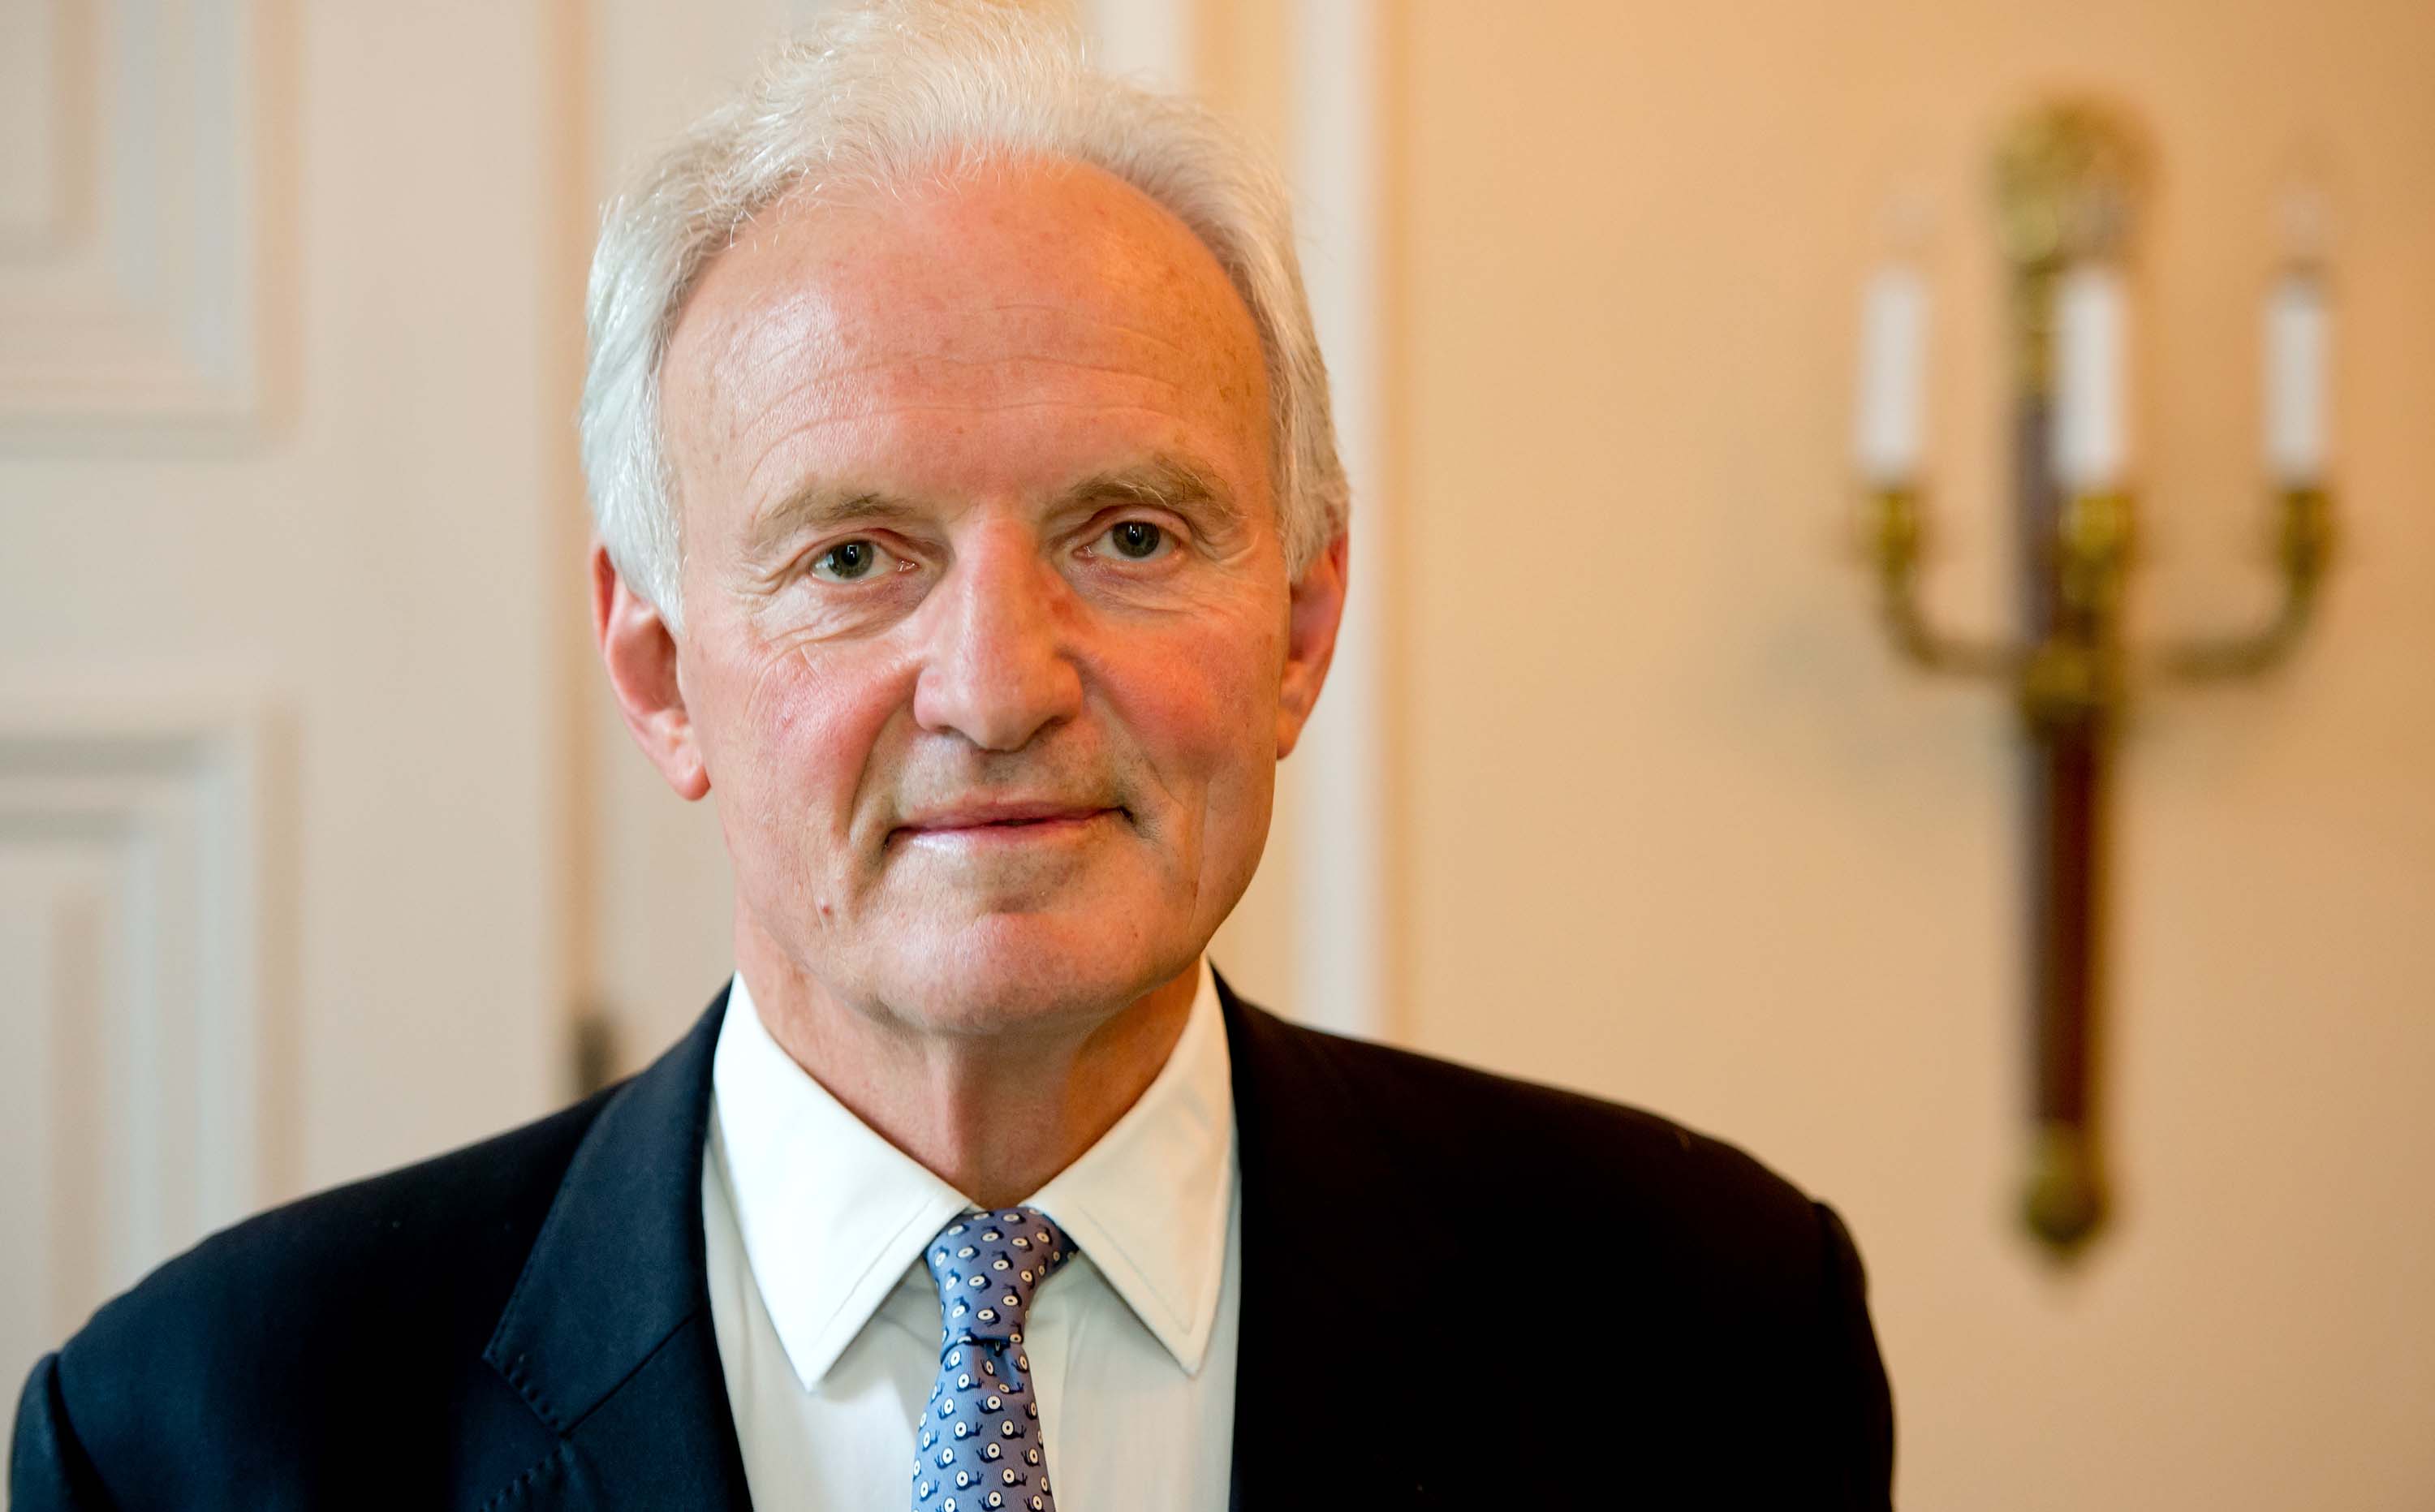 Charles Anson, former press officer for Queen Elizabeth II, is pictured in Munich, Germany, in 2015.